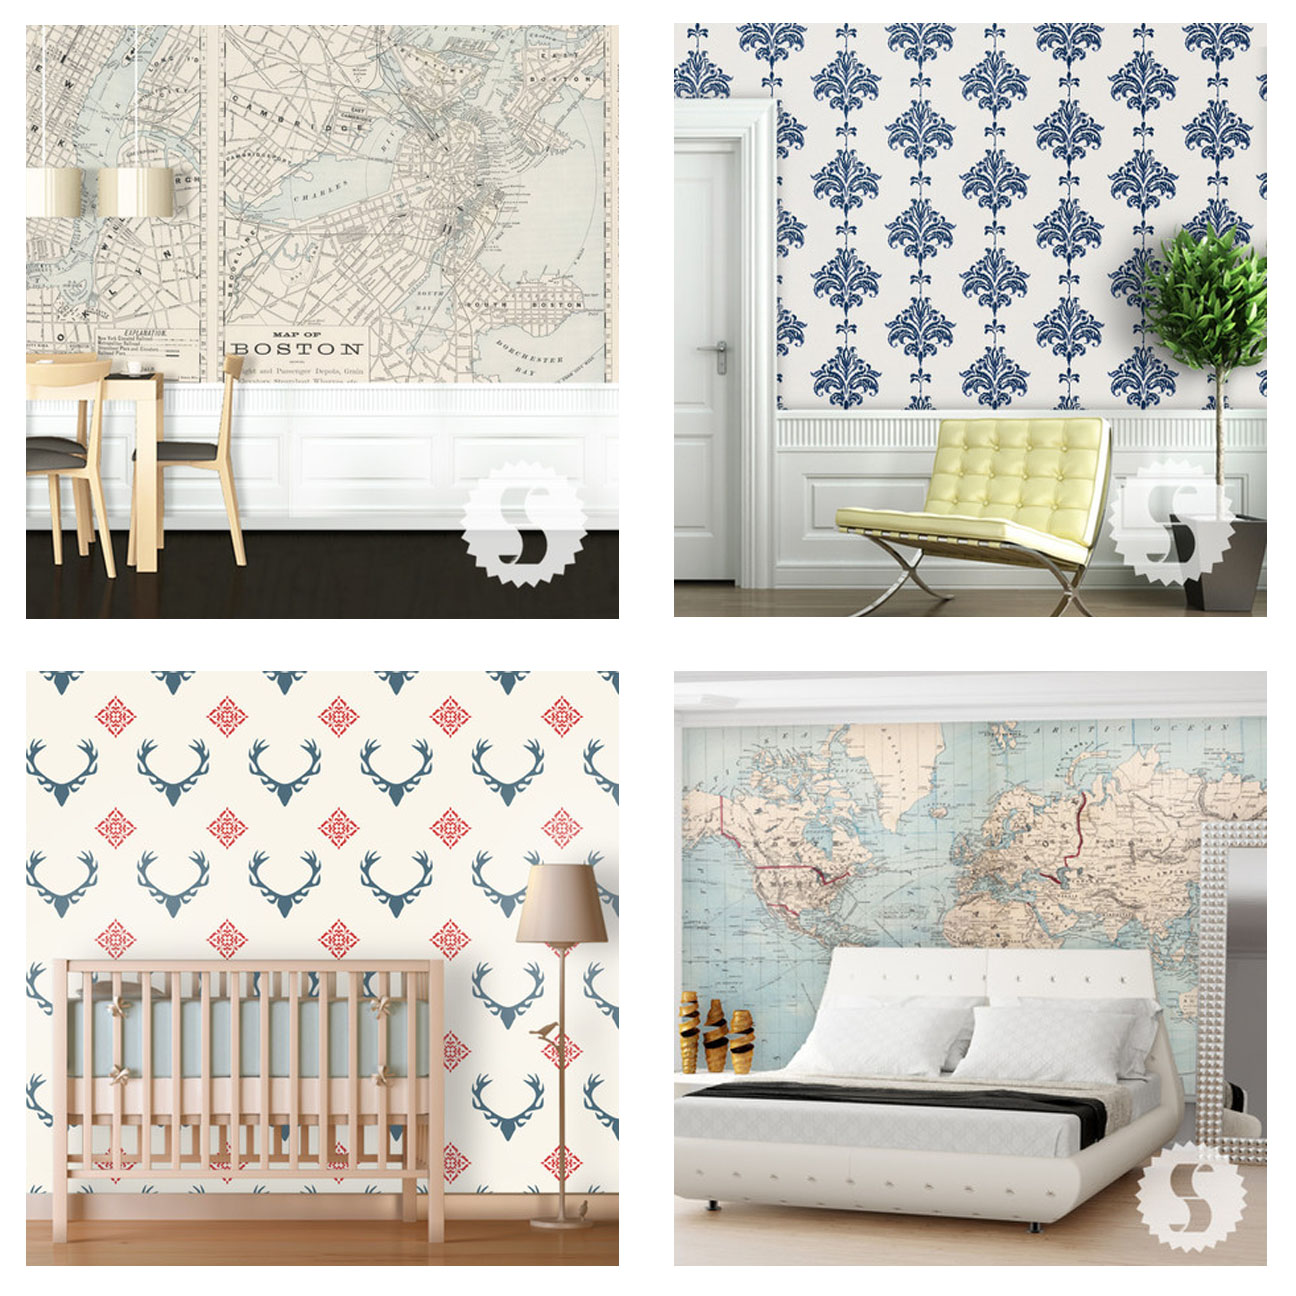 Swag Paper Removable Wallpaper (Boston - Retro, top left; Ikat - Navy, top right; Antlers - Retro, bottom left; and Map of the World - Vintage, bottom right)